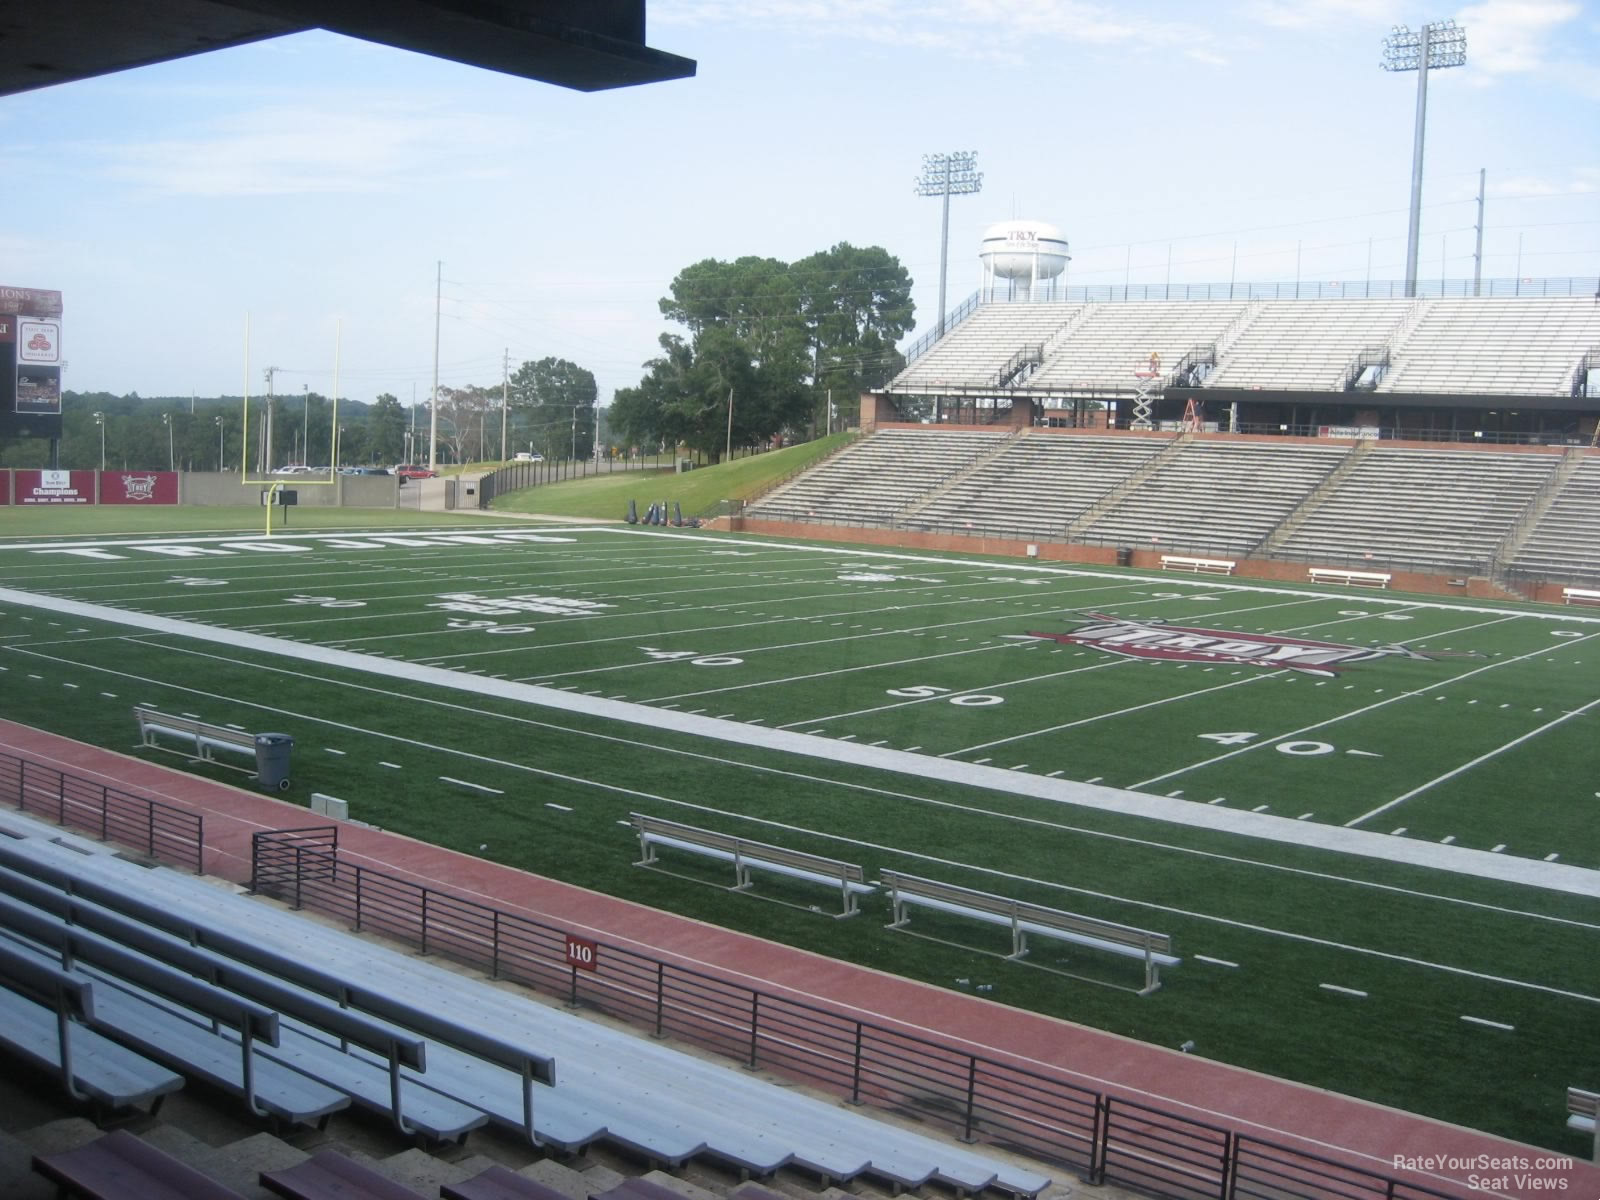 section 112, row 15 seat view  - troy memorial stadium